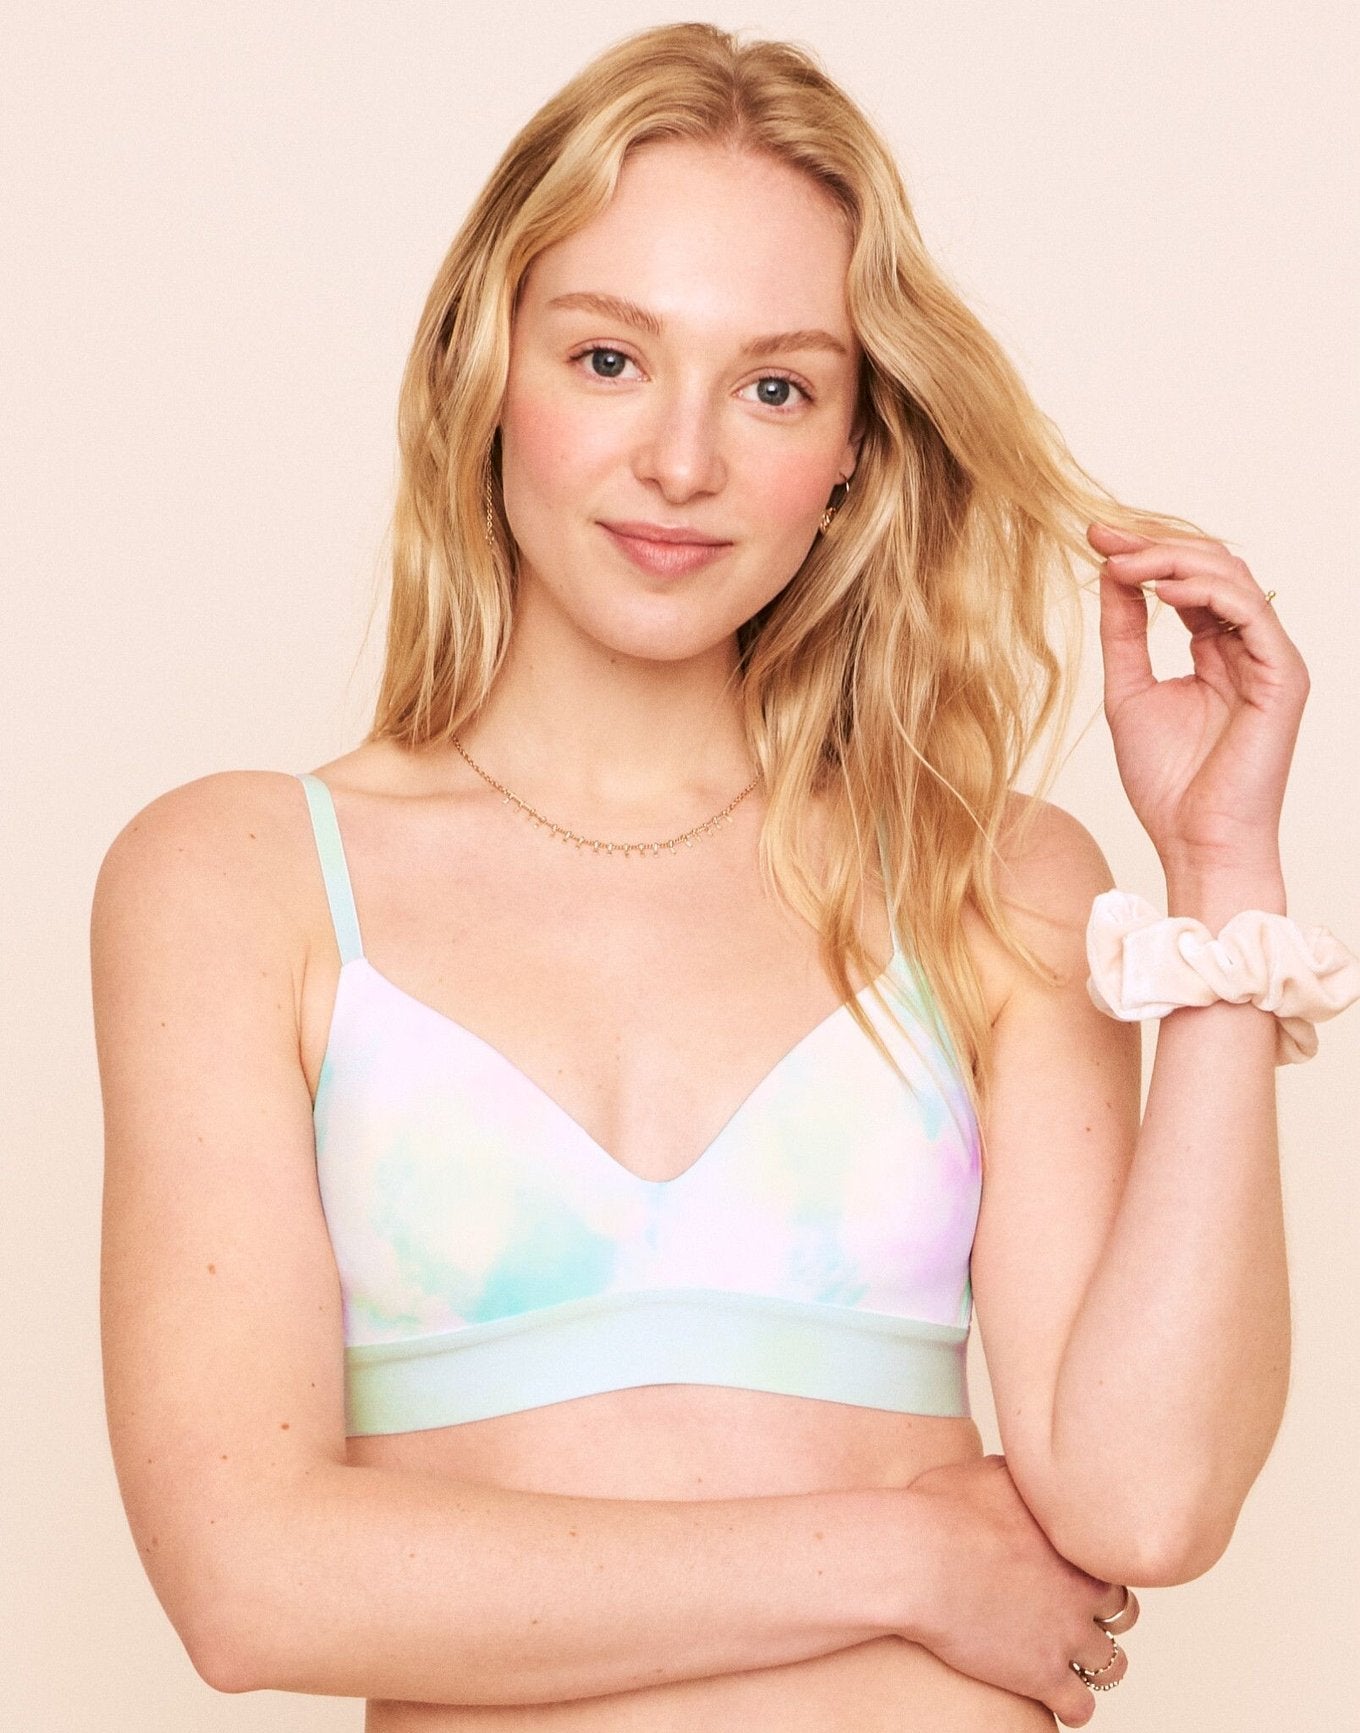 Earth Republic Makenna Lightly Lined Wireless Bra Wireless Bra in color Smudged Unicorn and shape plunge